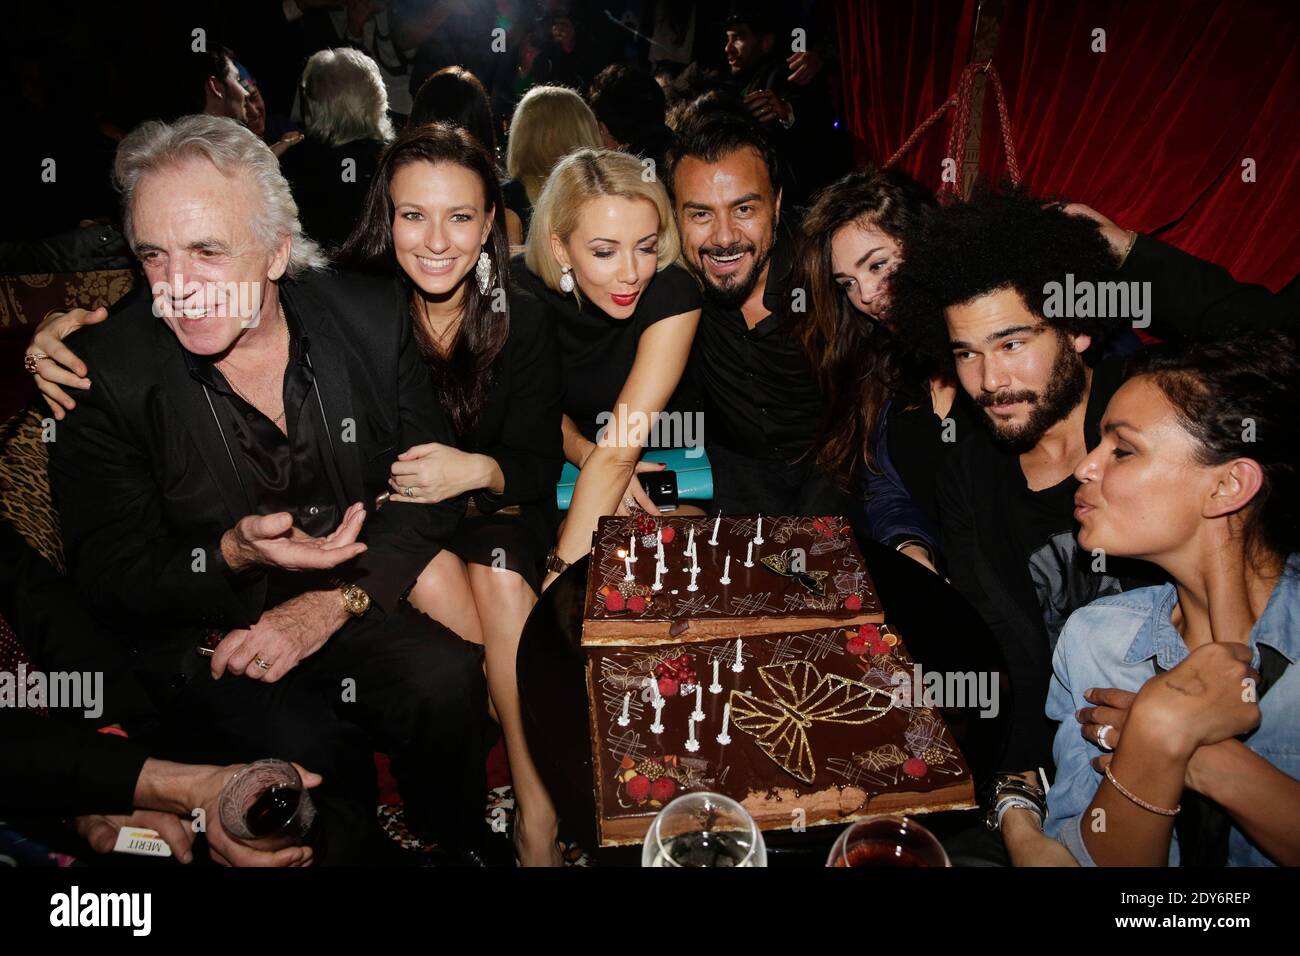 Muratt Atik, Joanna Atik, Peter Stringfellow and his wife, Lola Dewaere, Laurence Roustandjee and Alexandre Le Strat attending the New 'Stringfellows' Opening party and Muratt Atik's Birthday, in Paris, France on November 27, 2014. Photo by Jerome Domine ABACAPRESS.COM Stock Photo